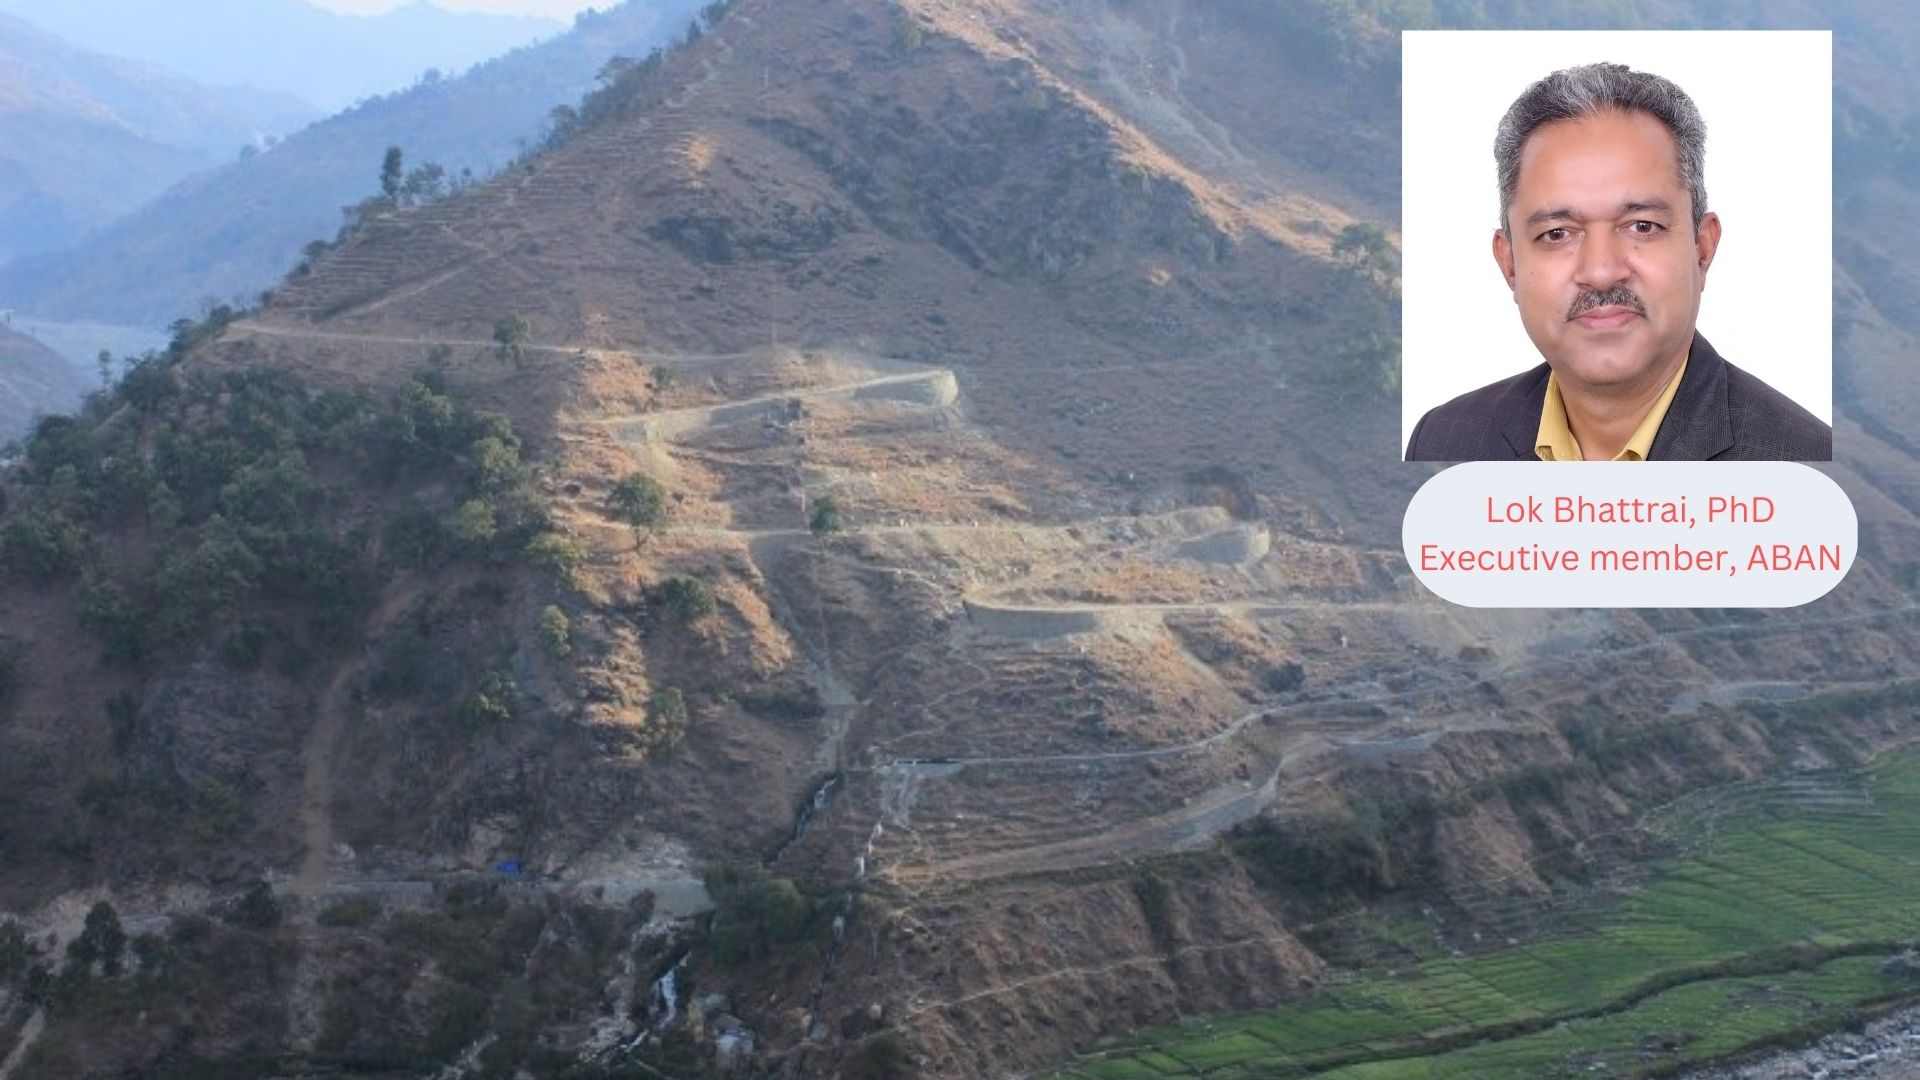 Development Impasse and UK’s Official Development Assistance in Nepal